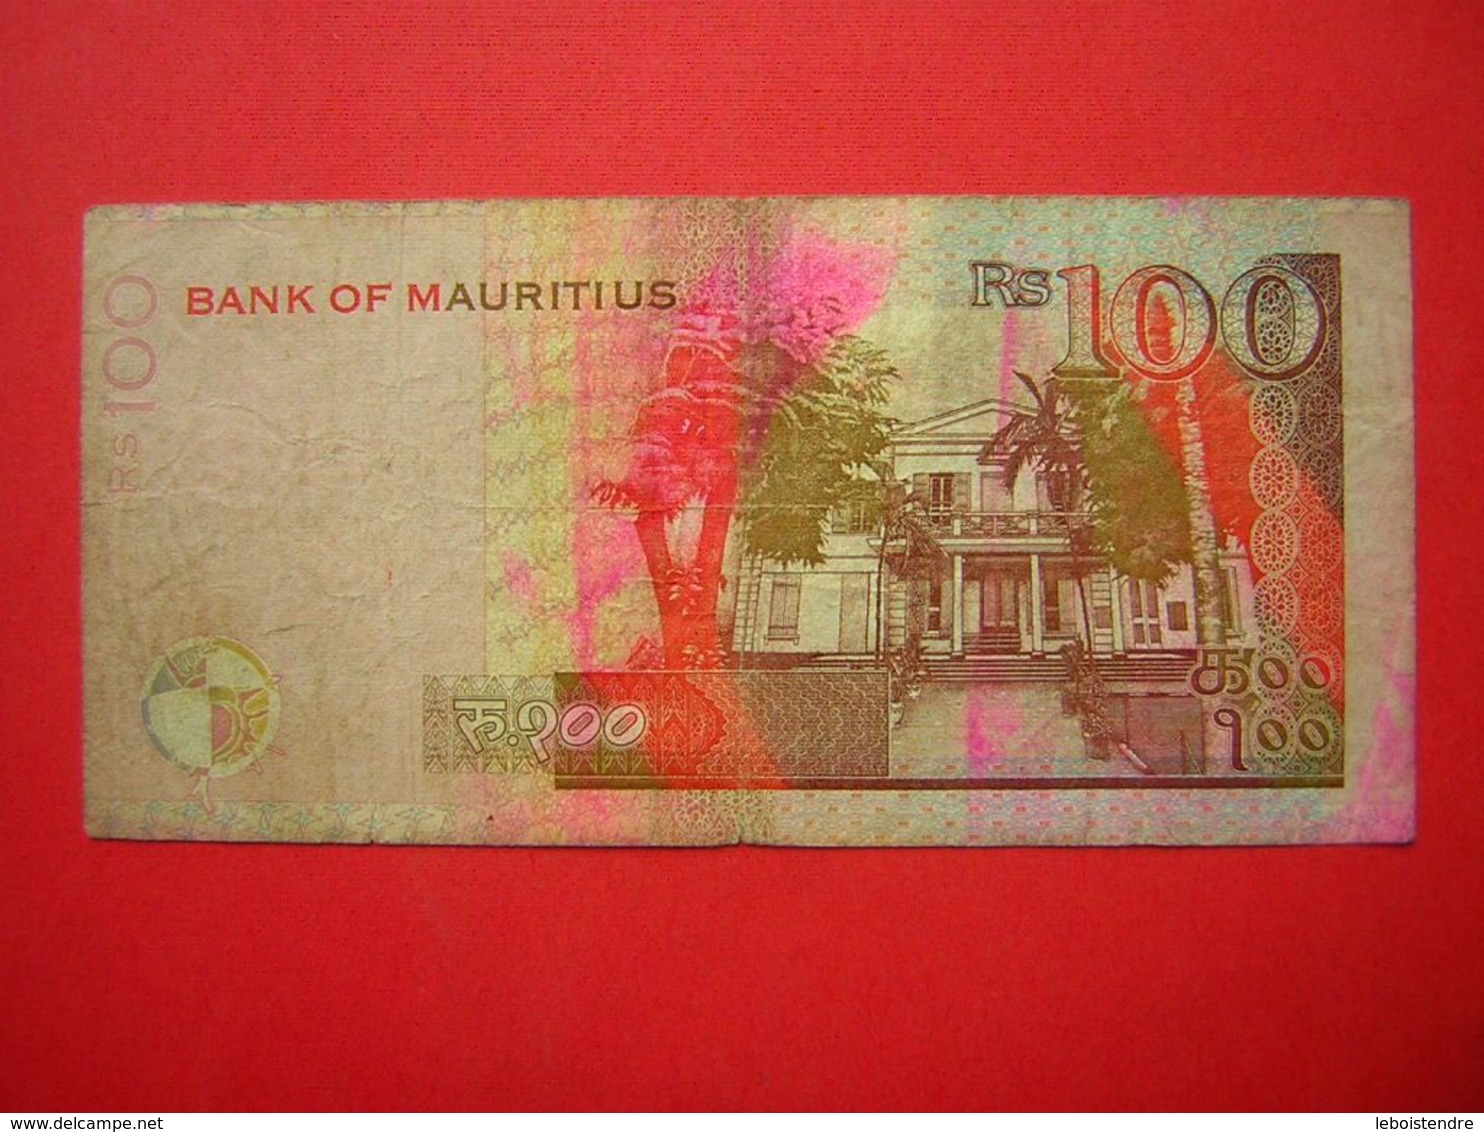 1 BILLET BANK OF MAURITIUS  RS 100 ONE HUNDRED 1999 - Mauricio